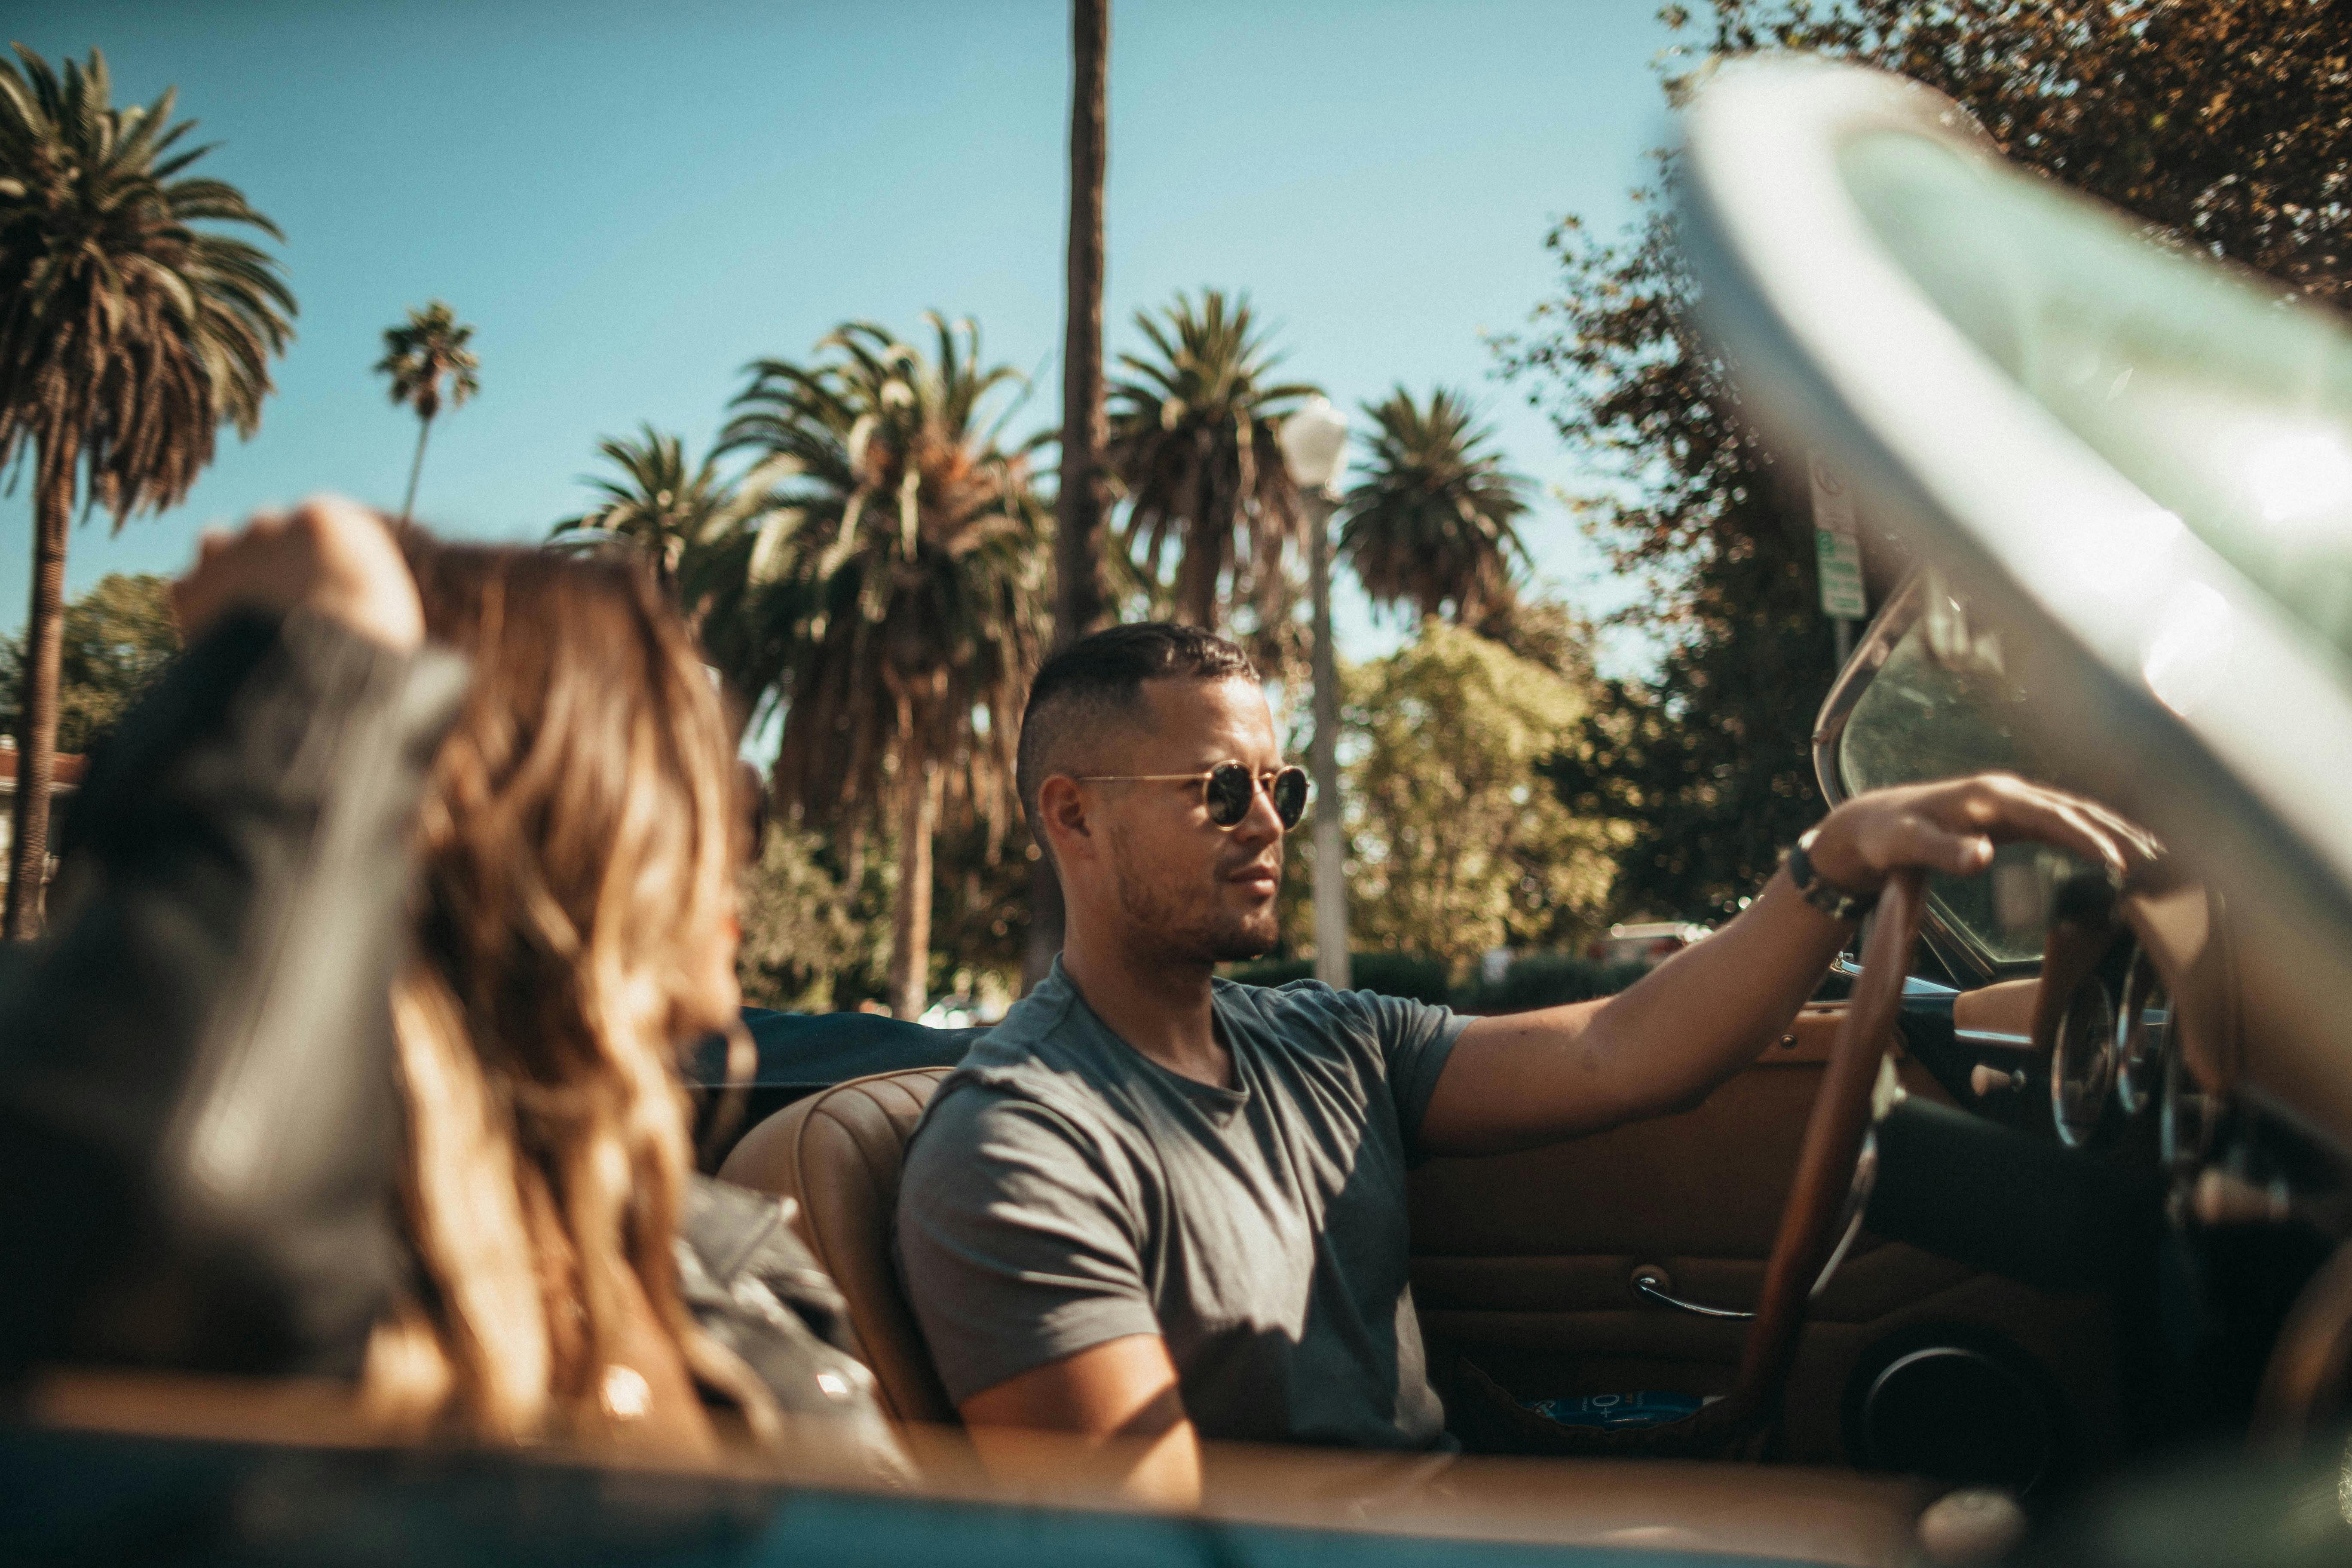 A couple driving in a convertible car | Source: Pexels